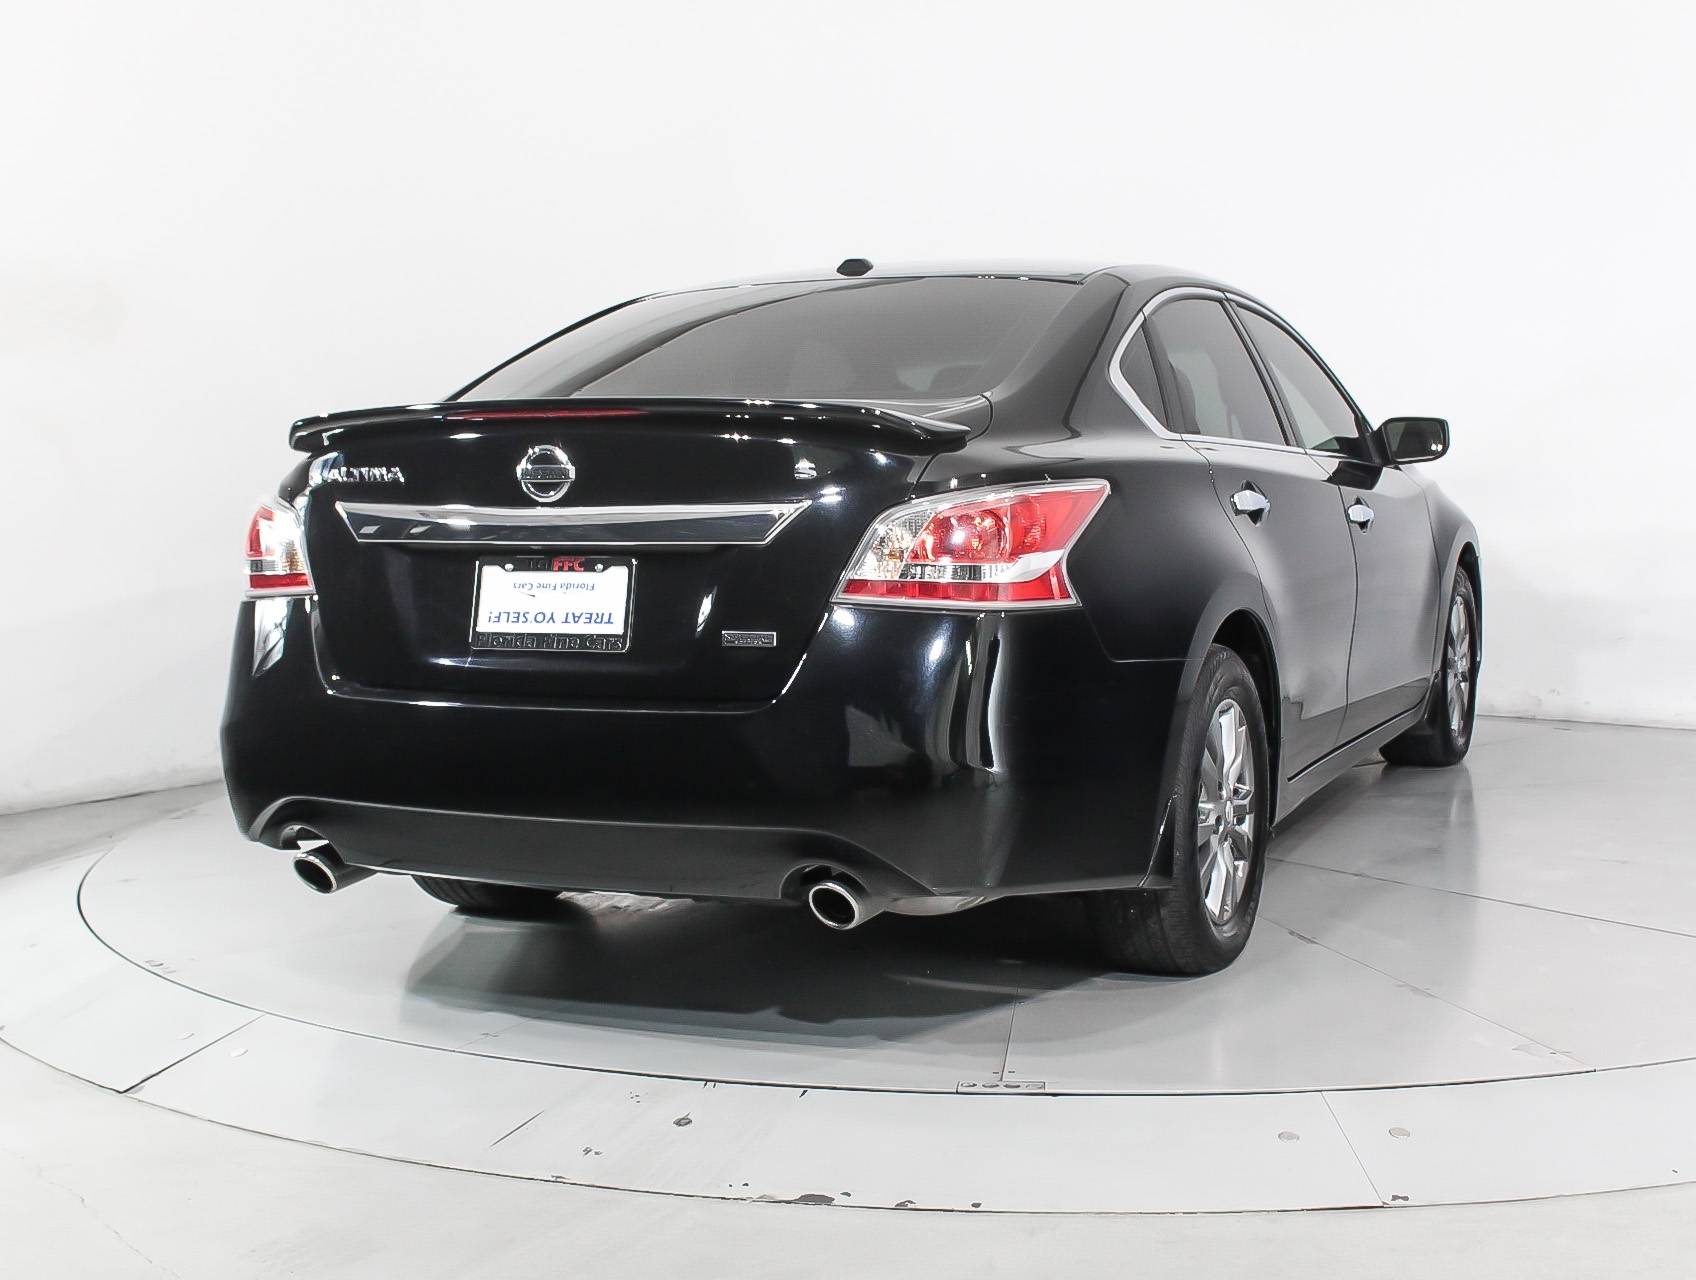 Florida Fine Cars - Used NISSAN ALTIMA 2015 MARGATE Special Edition 